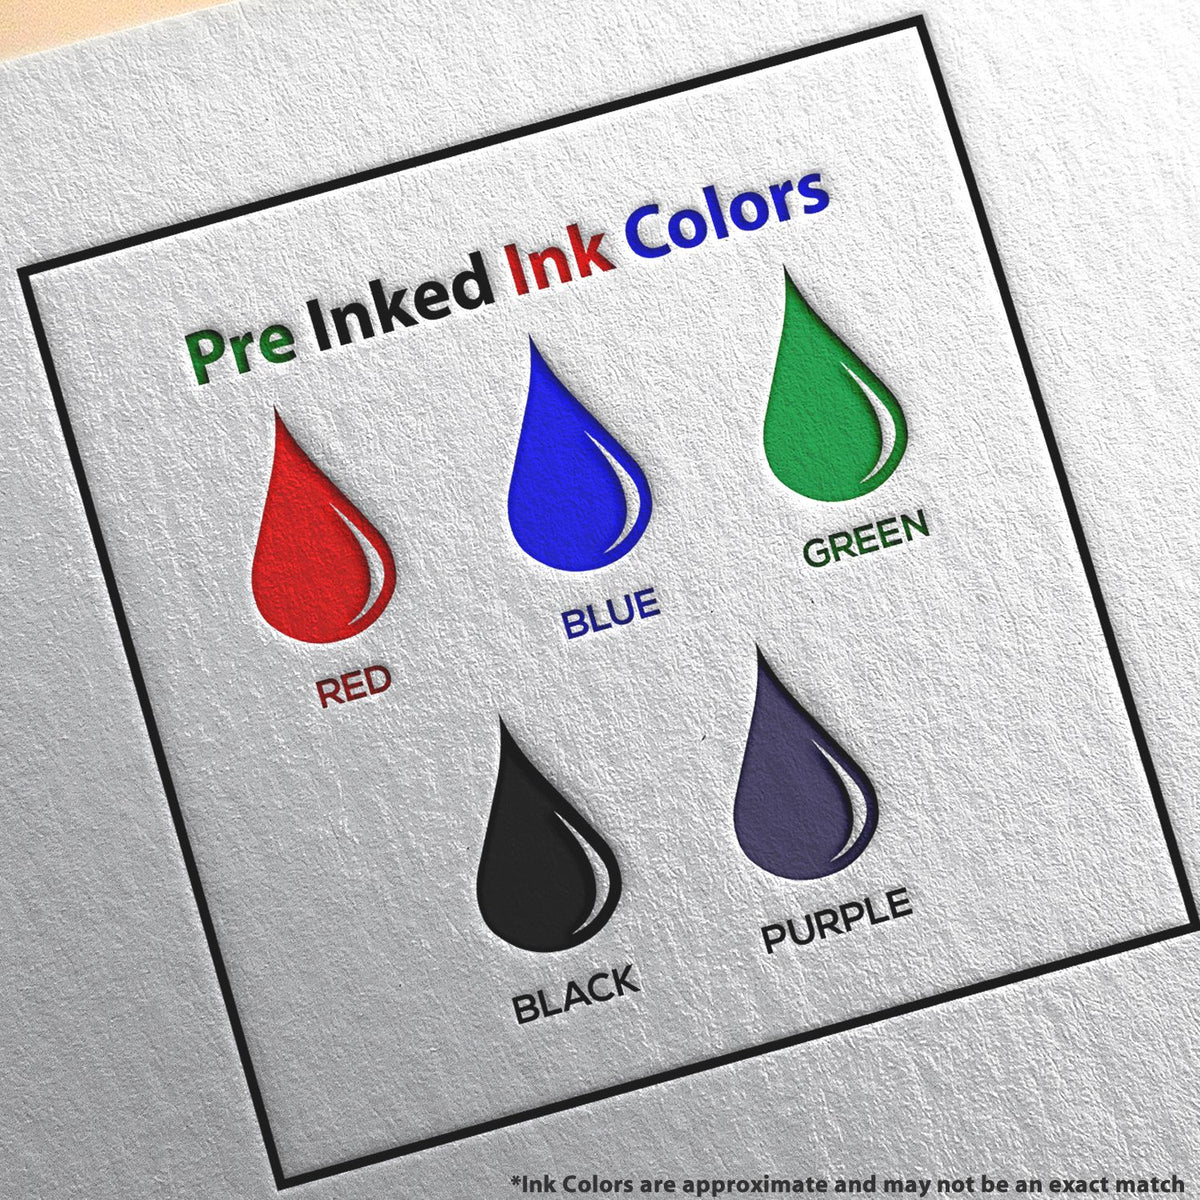 A picture showing the different ink colors or hues available for the MaxLight Premium Pre-Inked Washington Rectangular Notarial Stamp product.